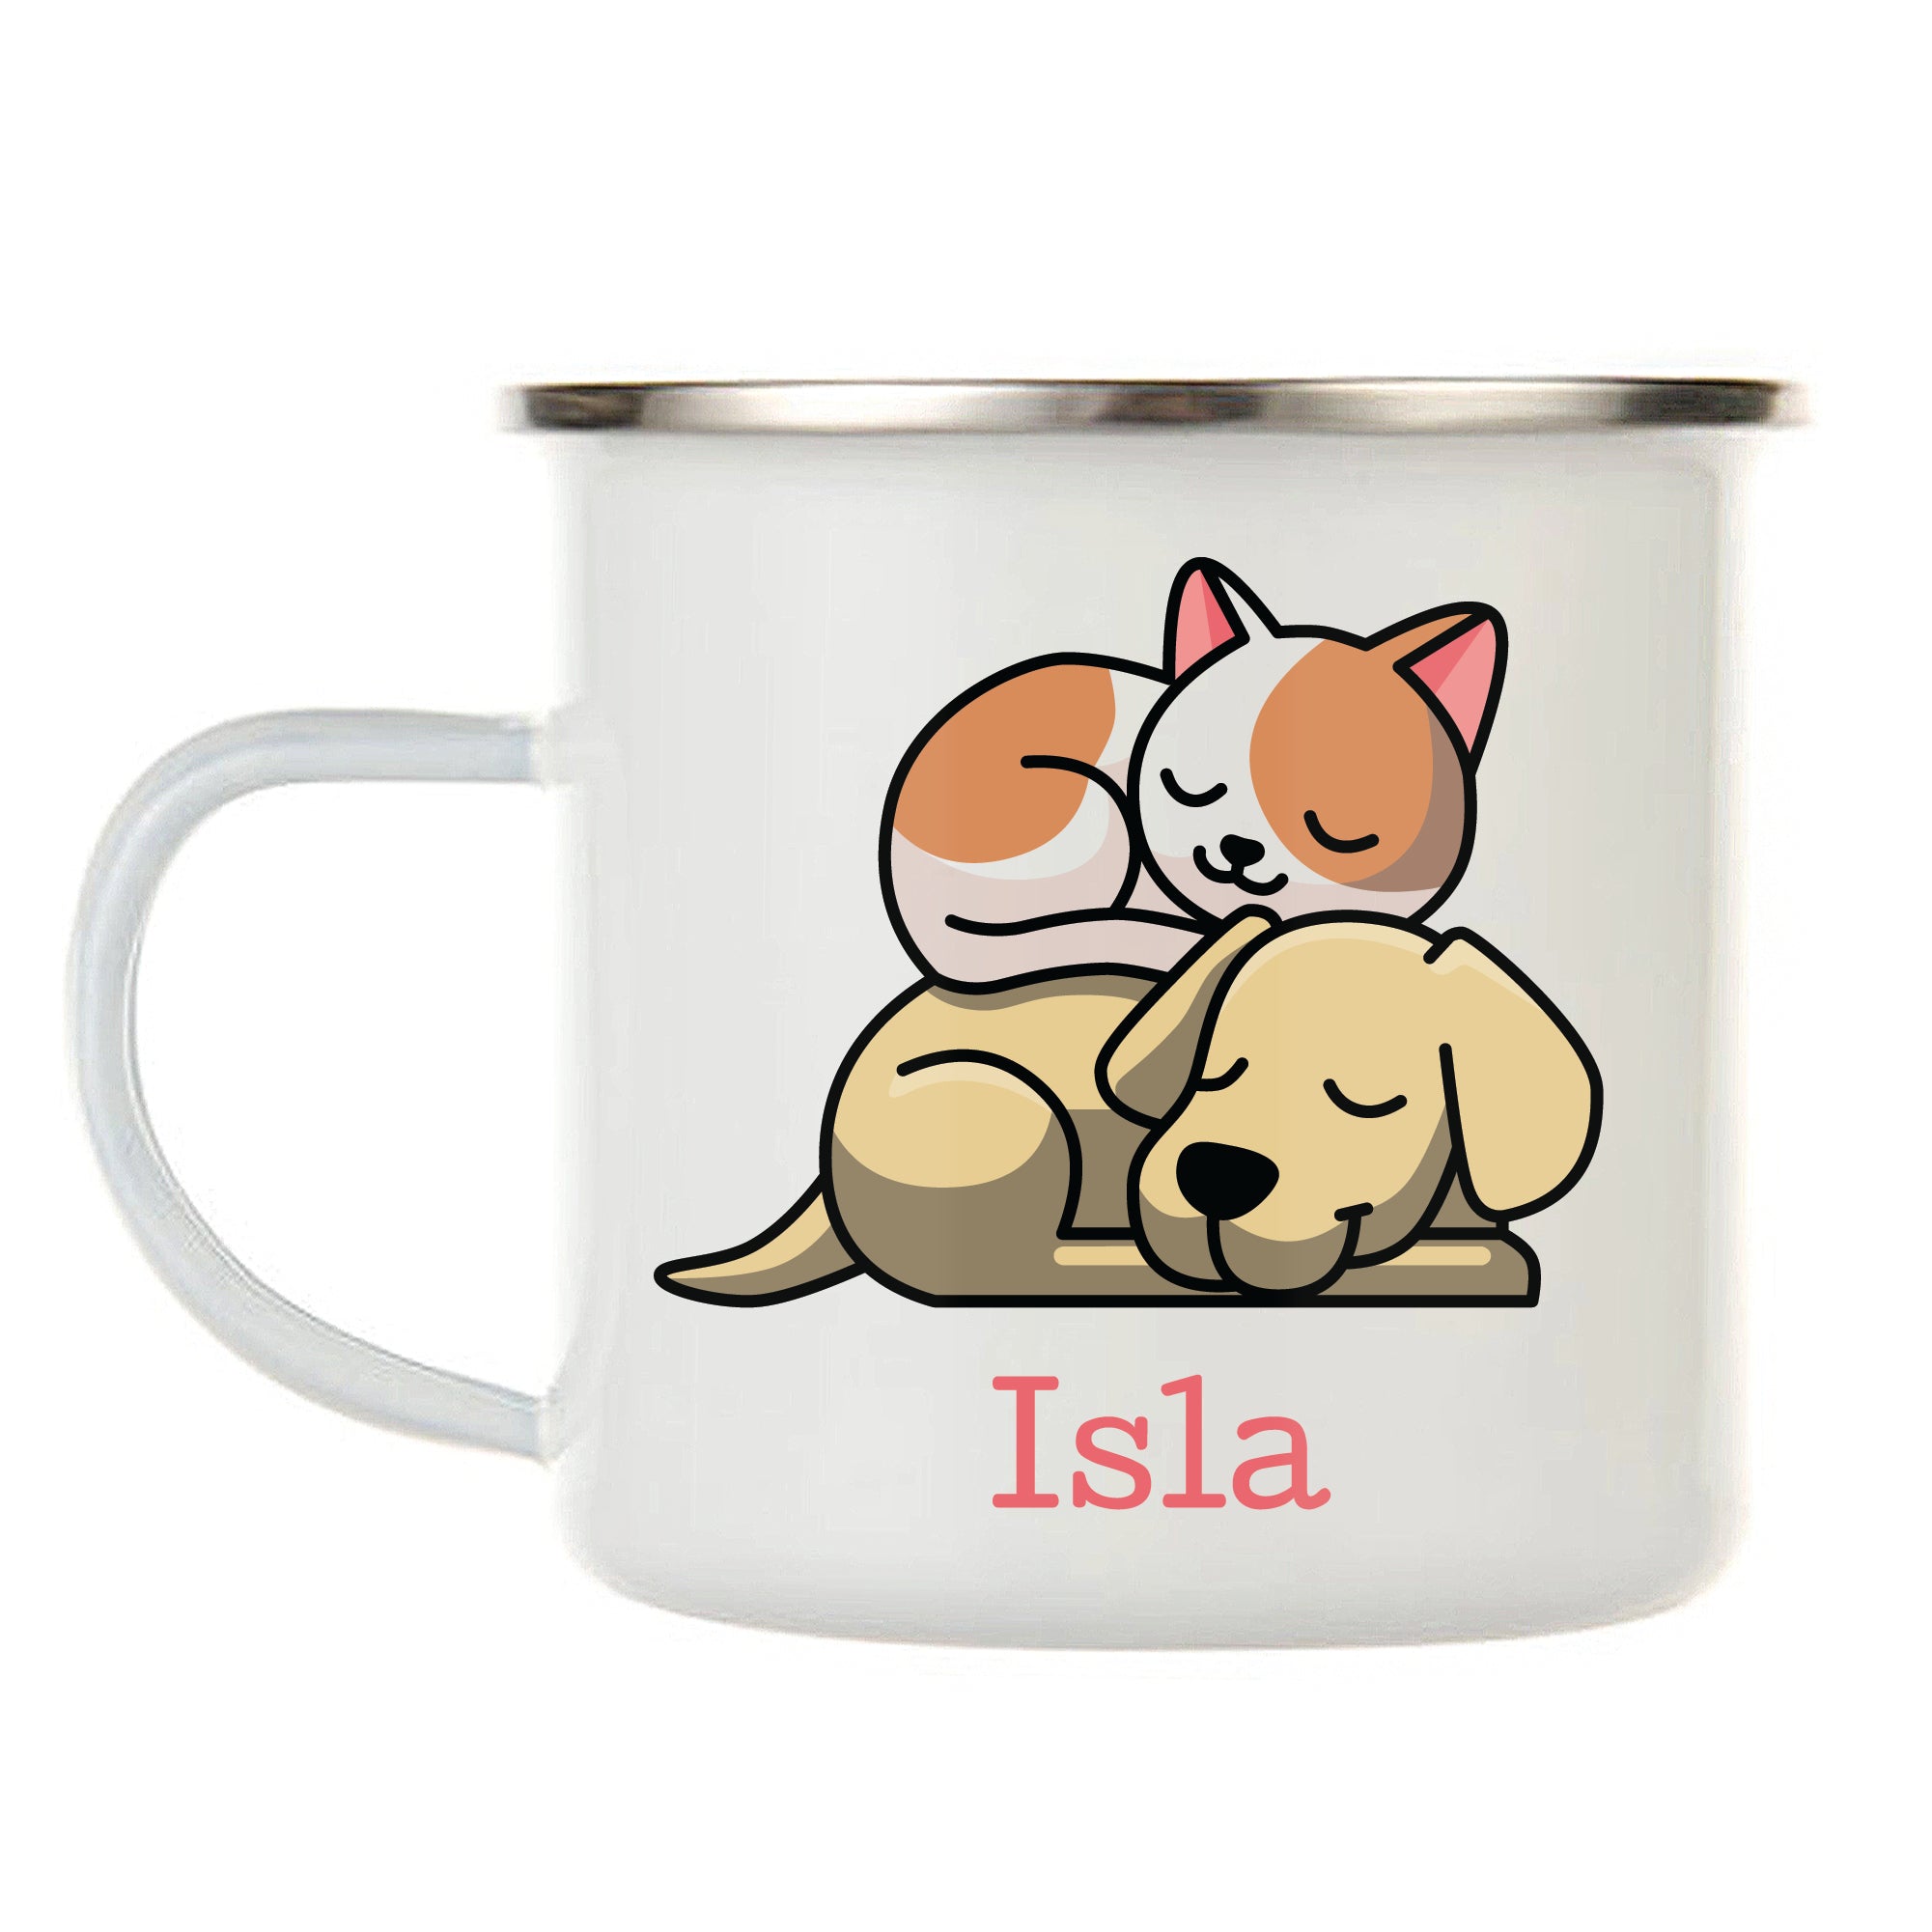 Kids Personalized 12 oz. Stainless Steel & Enamel Camp Mug with Better Together Dog and Cat